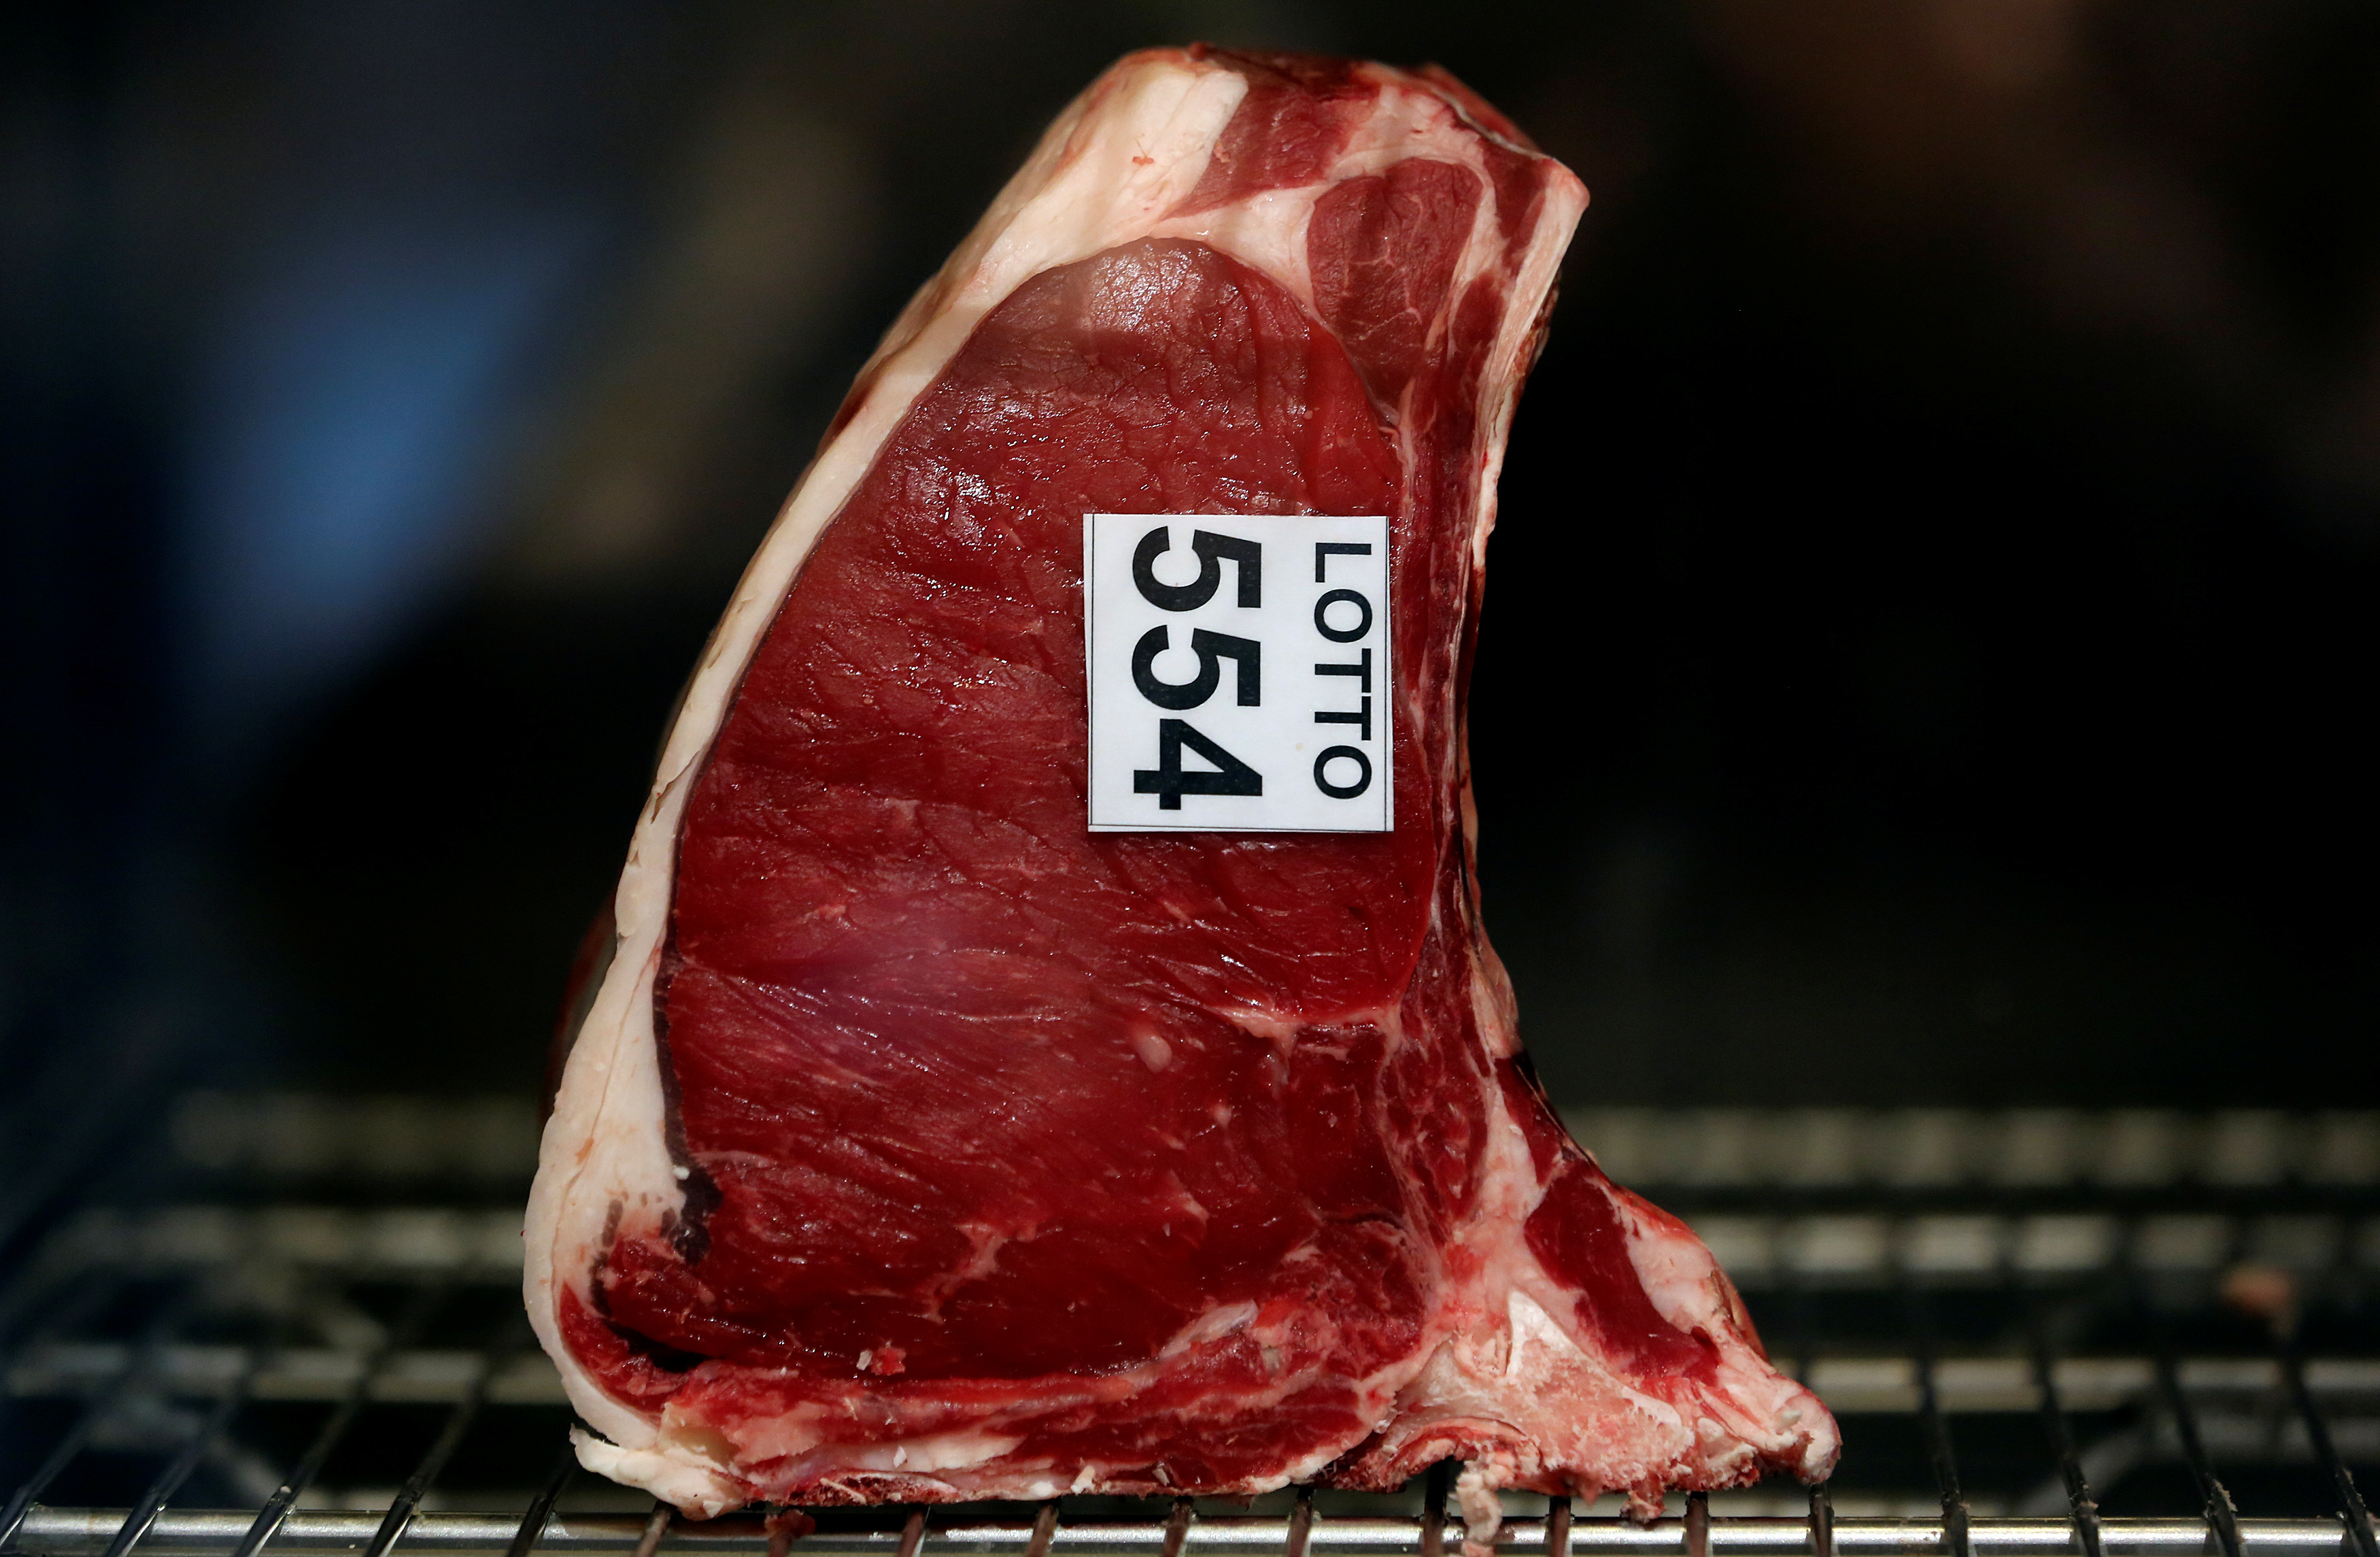 A steak is seen at the Eataly food market store in Milan